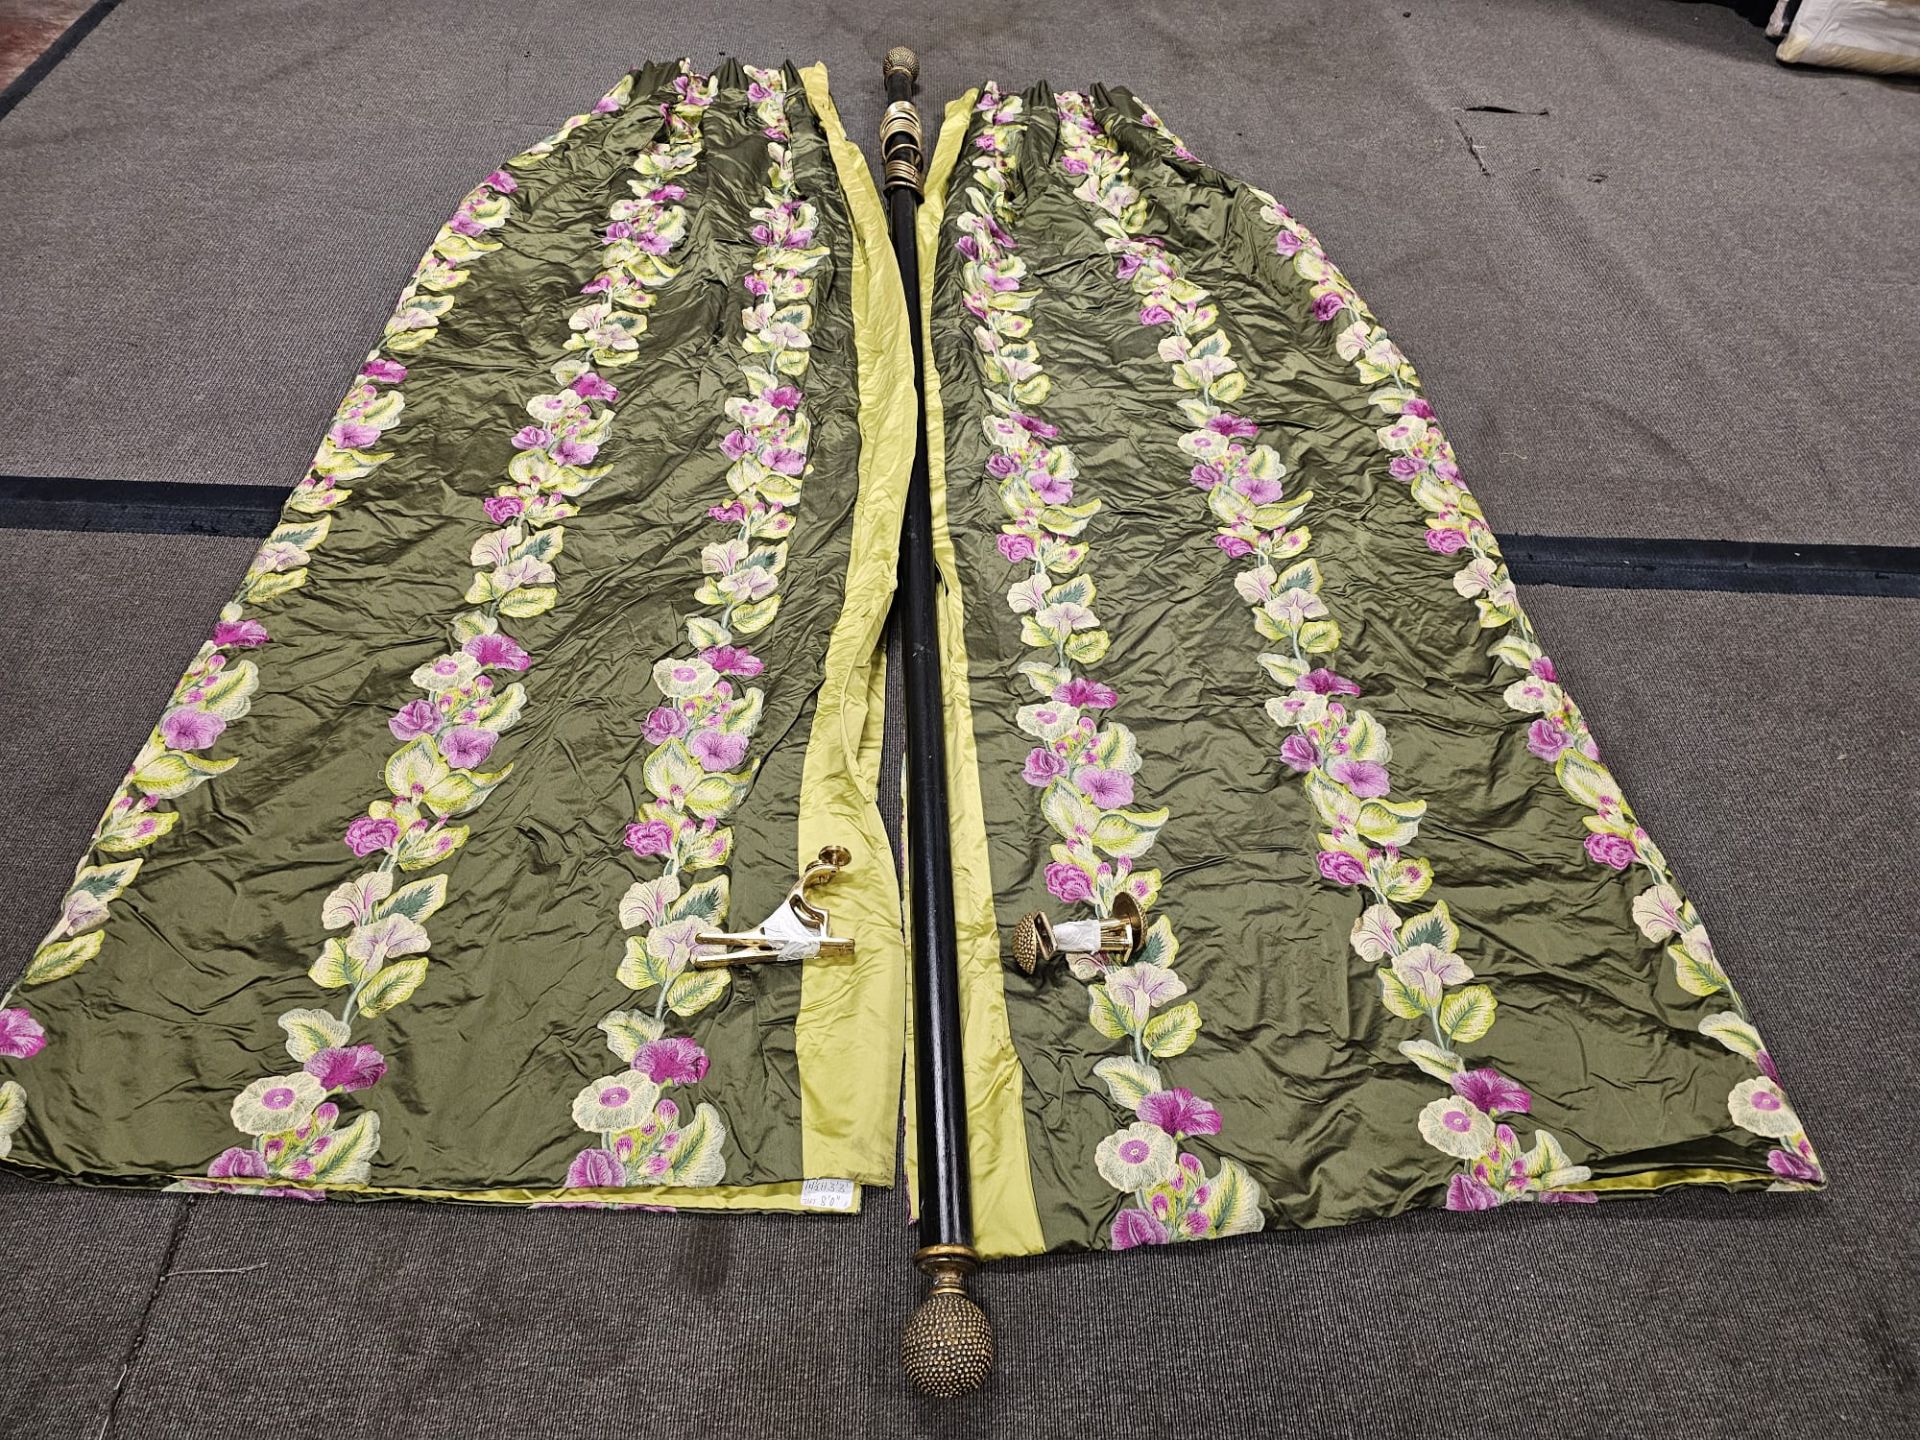 A pair of silk drapes green and pink floral pattern with wood curtain pole 176 x 280cm (Dorch 14)